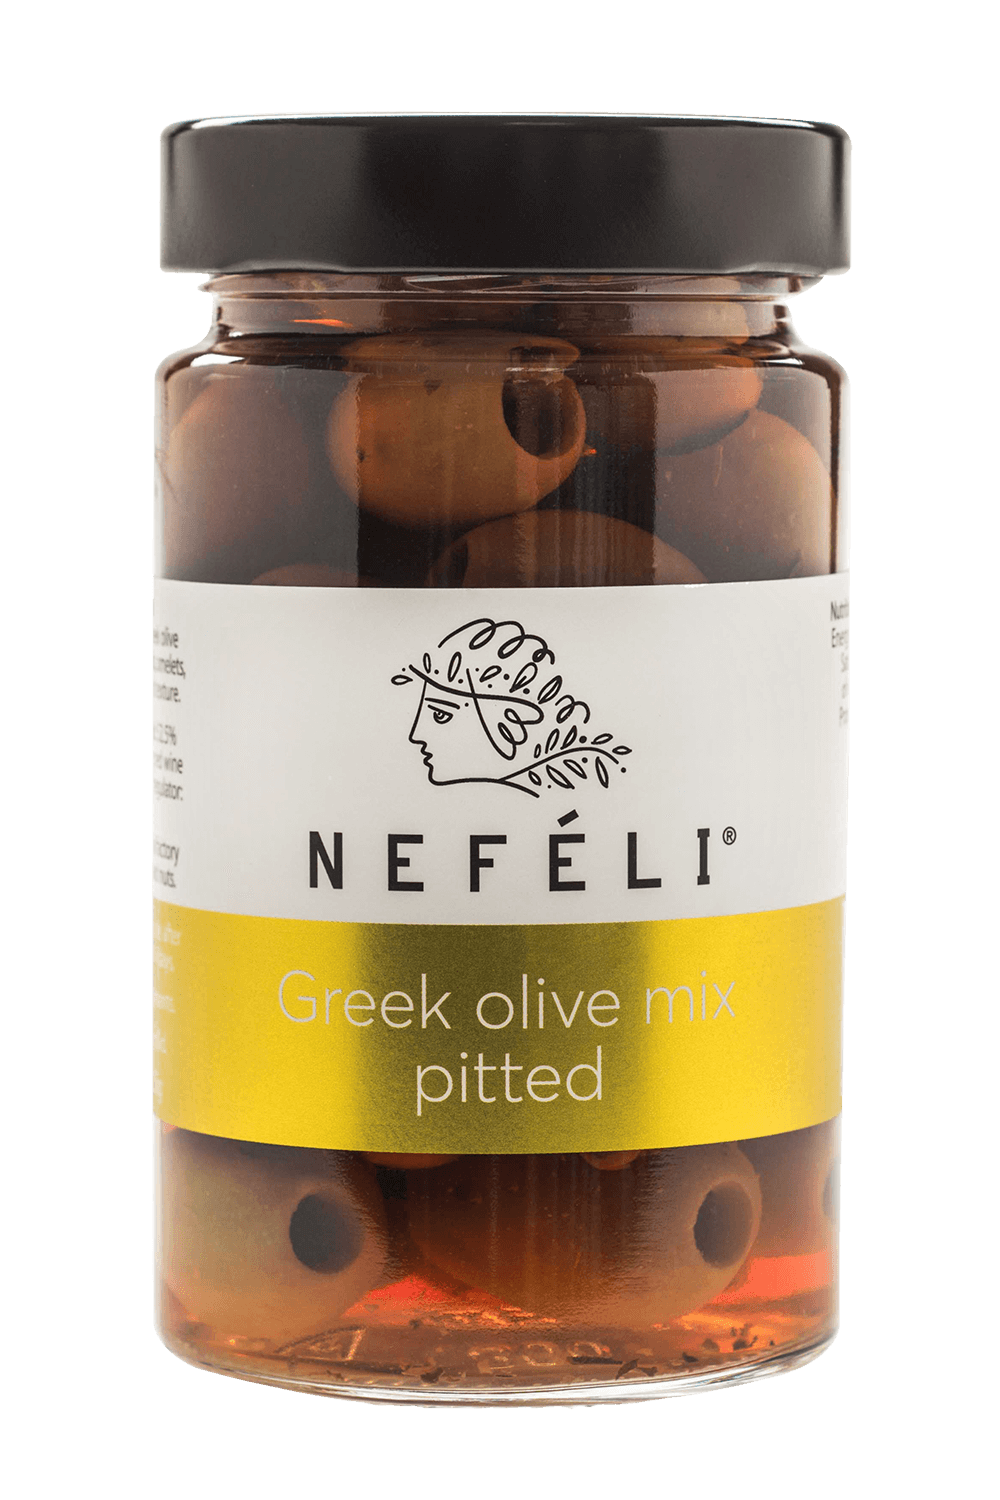 Greek olive mix pitted